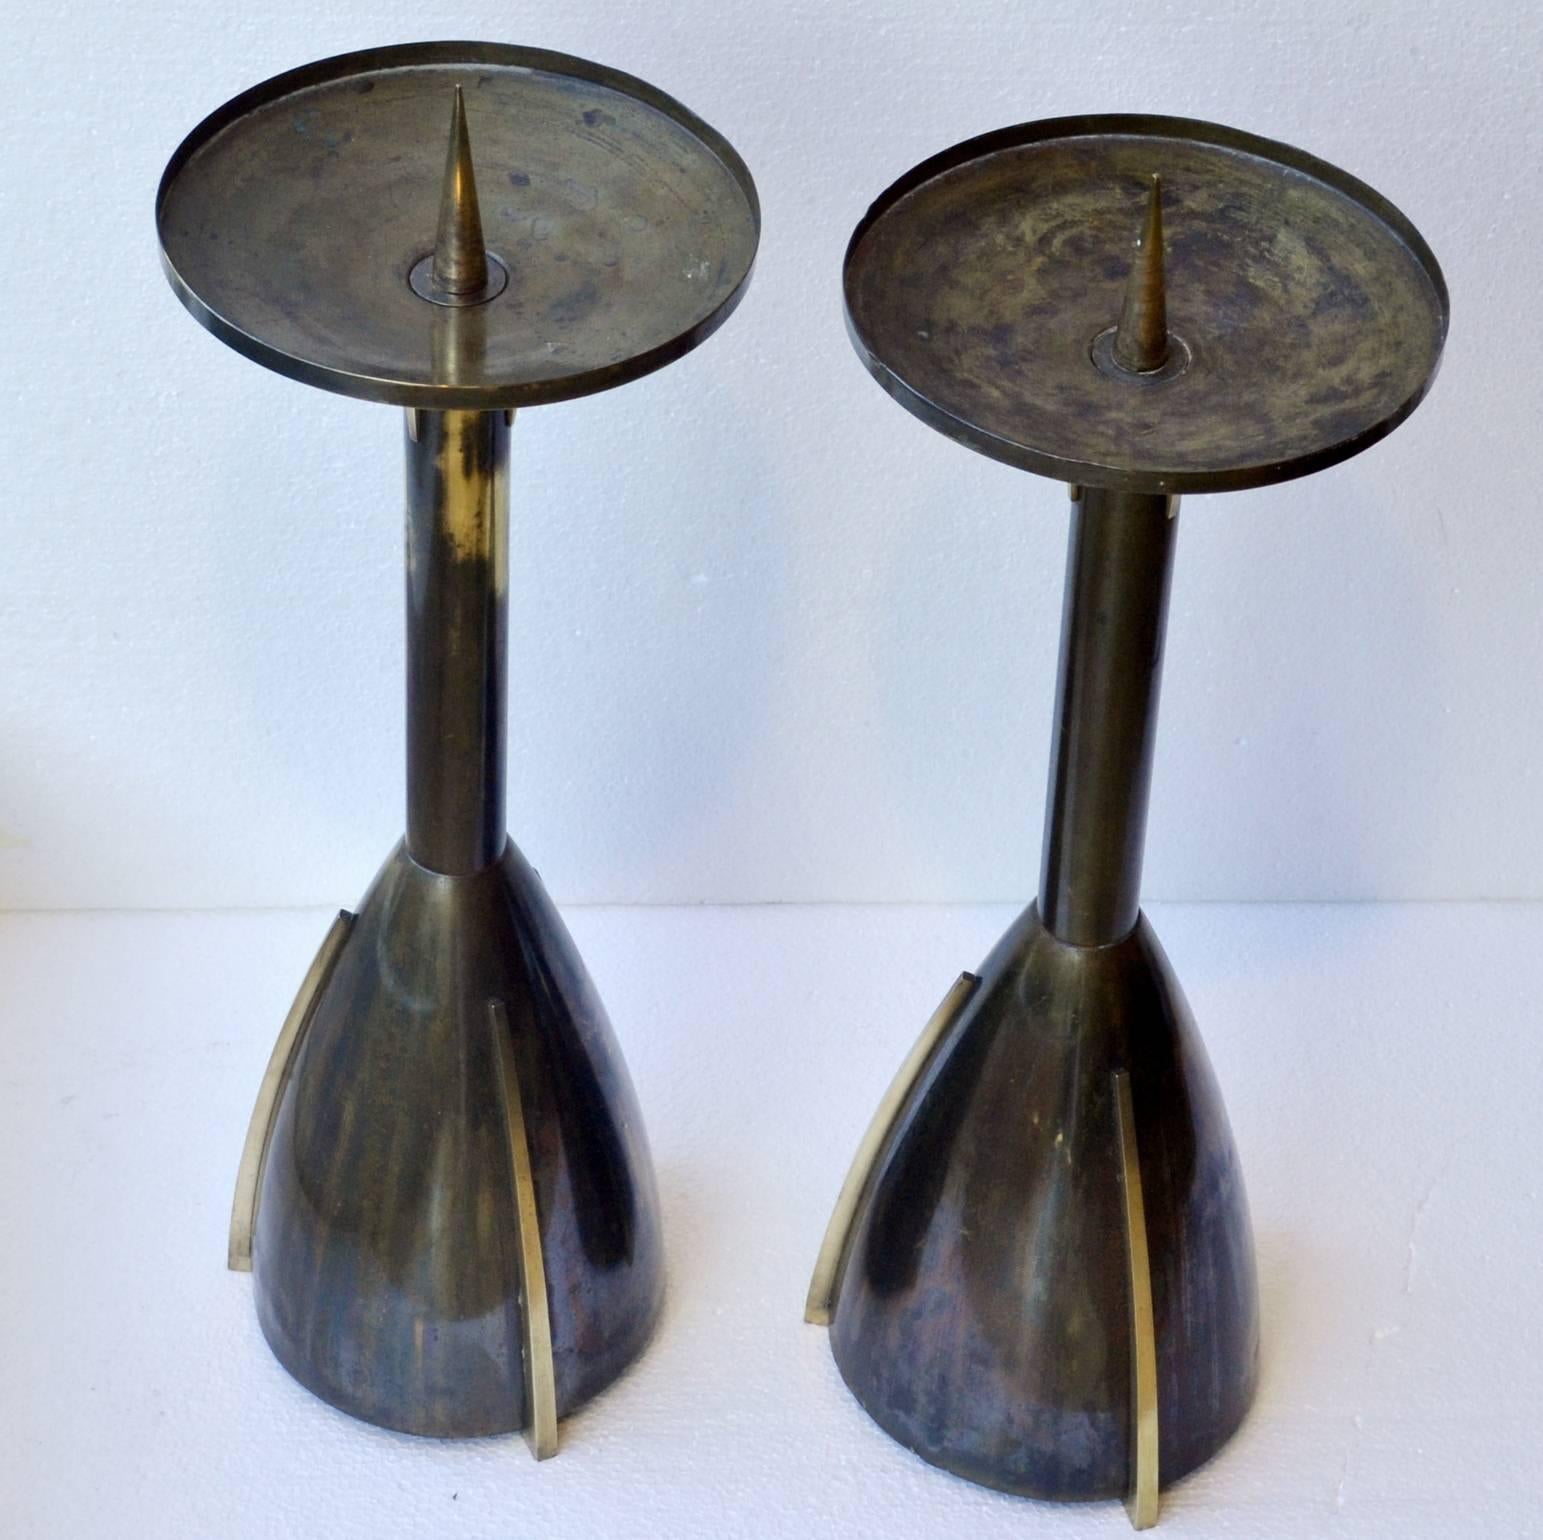 Monumental 1930's candlestick patinated bronze and brass from Belgium or the Netherlands. Suitable as floor candle holder. Hand made bees wax candle available on request.